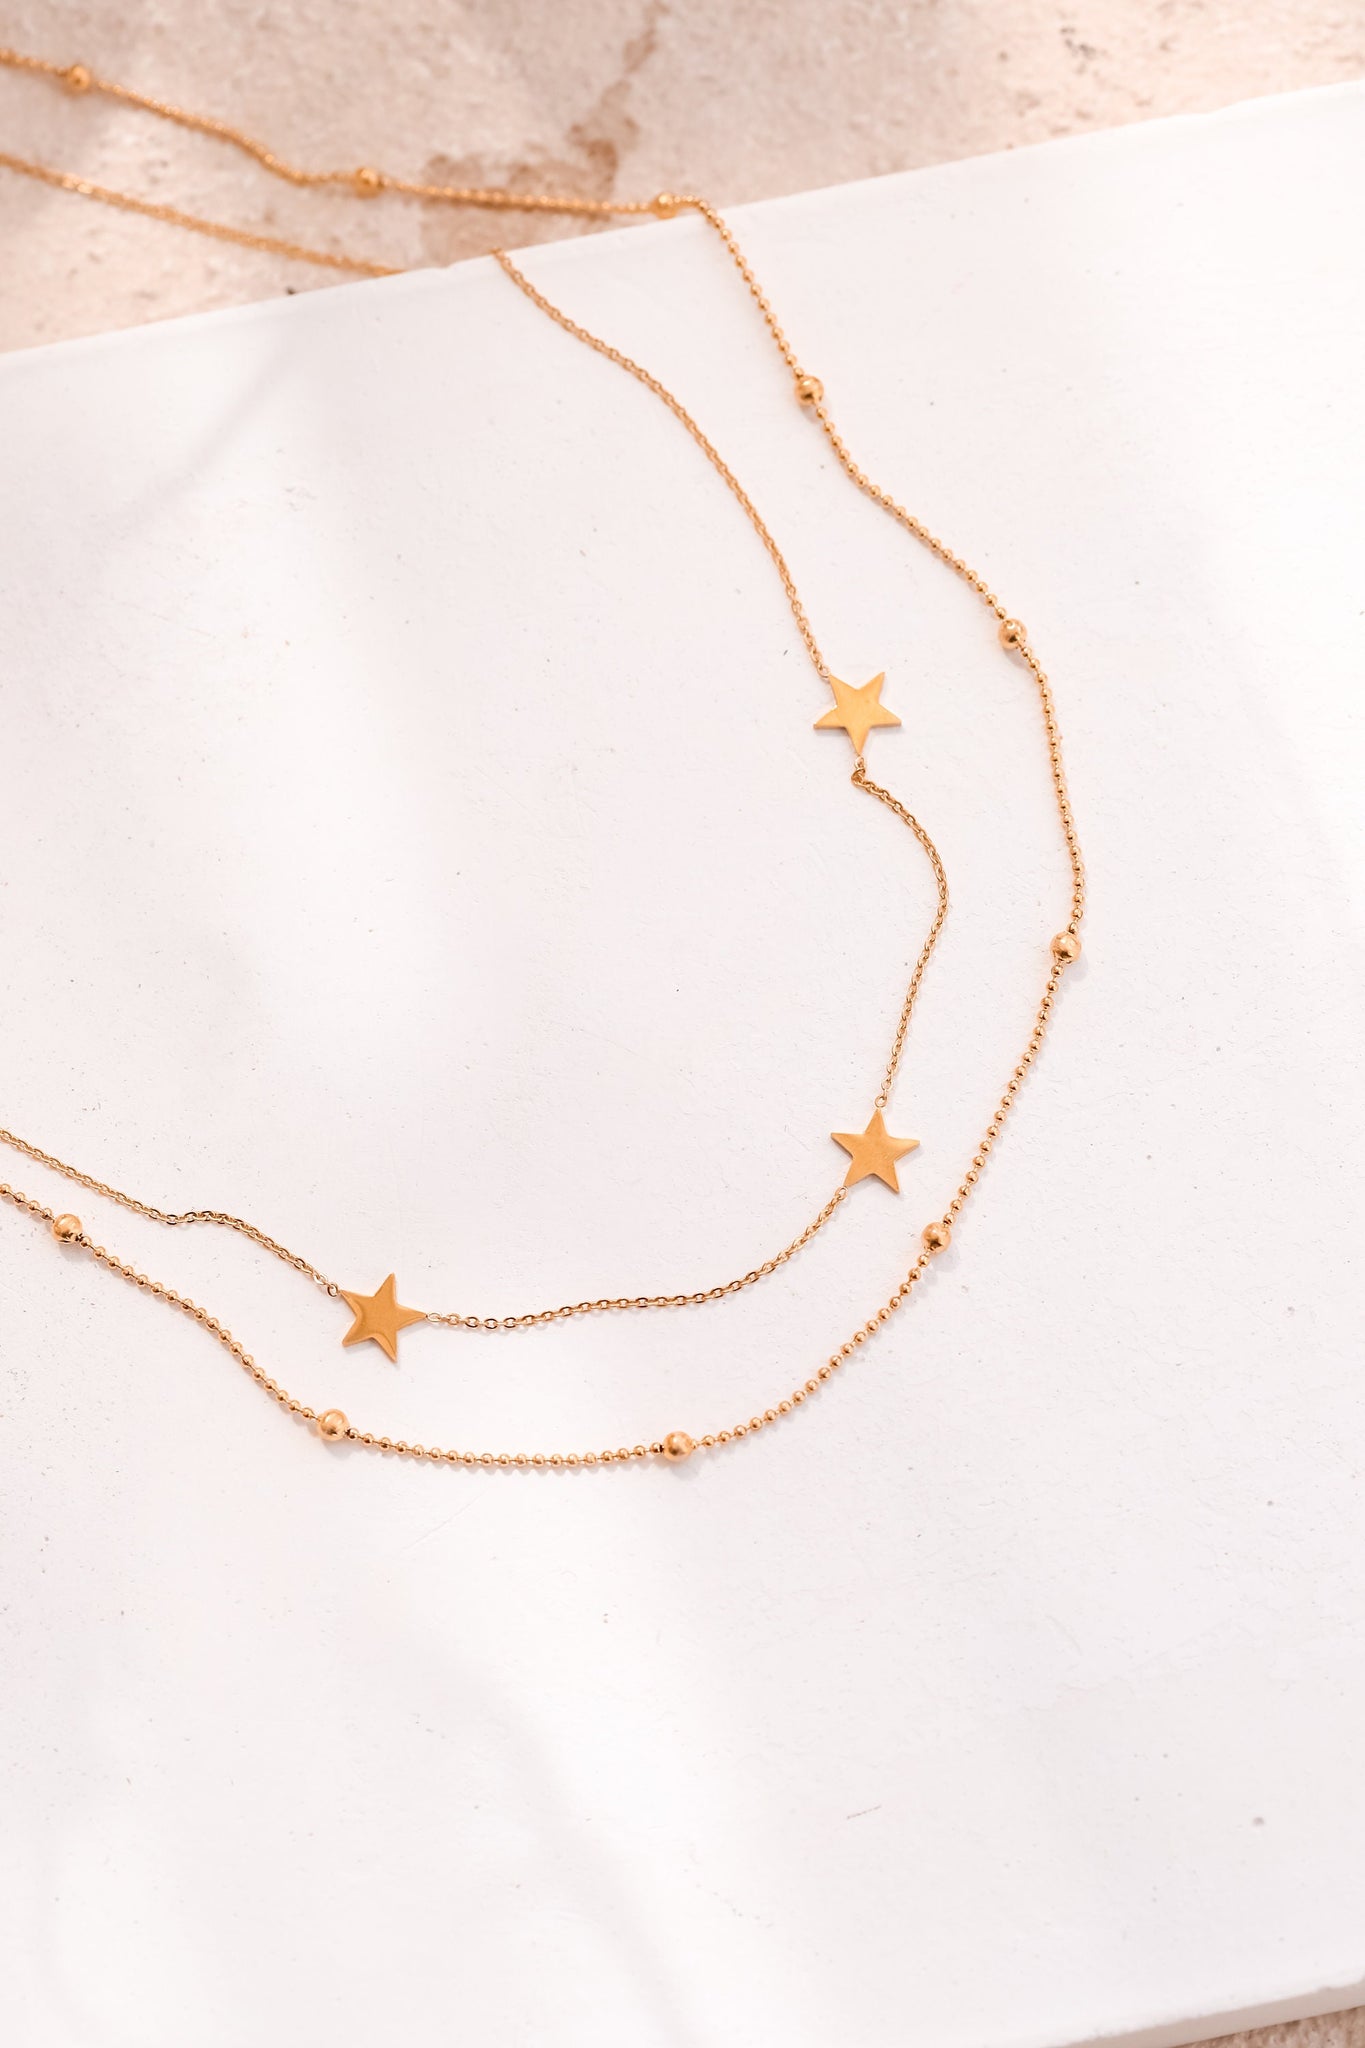 Double Layer Star Necklace, 18K Gold, Gift For Mom, Dainty Necklace, Minimalist Necklace,Star Necklace,Boho Beaded Choker,Necklace for Women